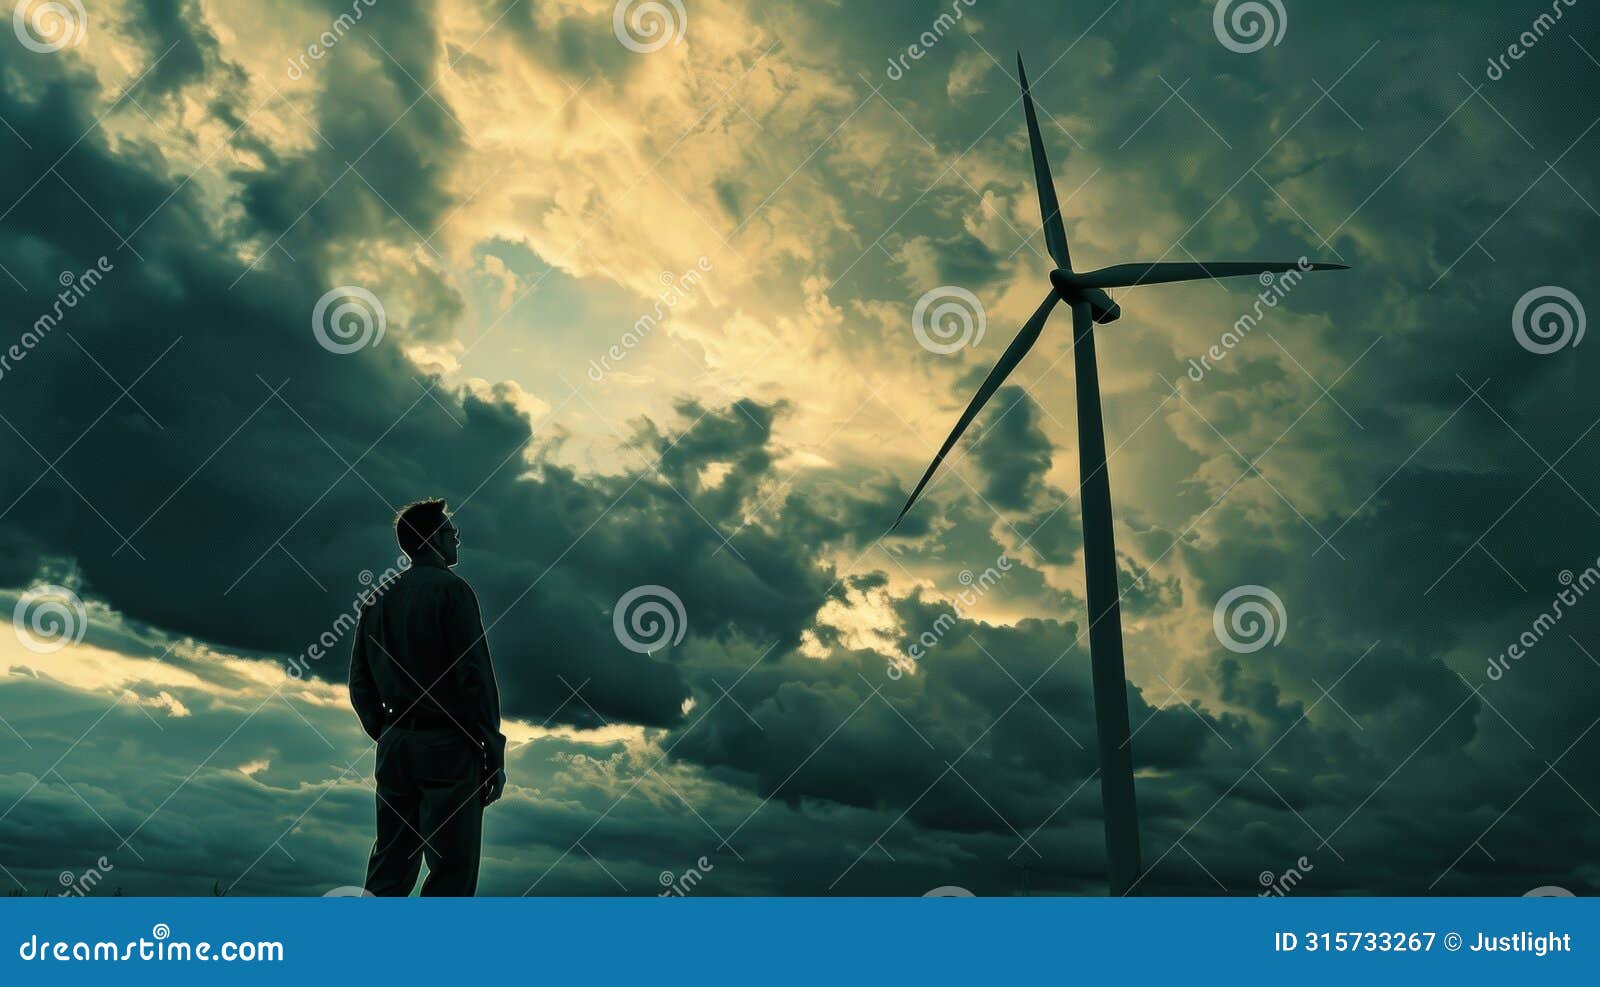 a powerful wind turbine against a dramatic cloudy sky serves as the focal point of the image. in the foreground a